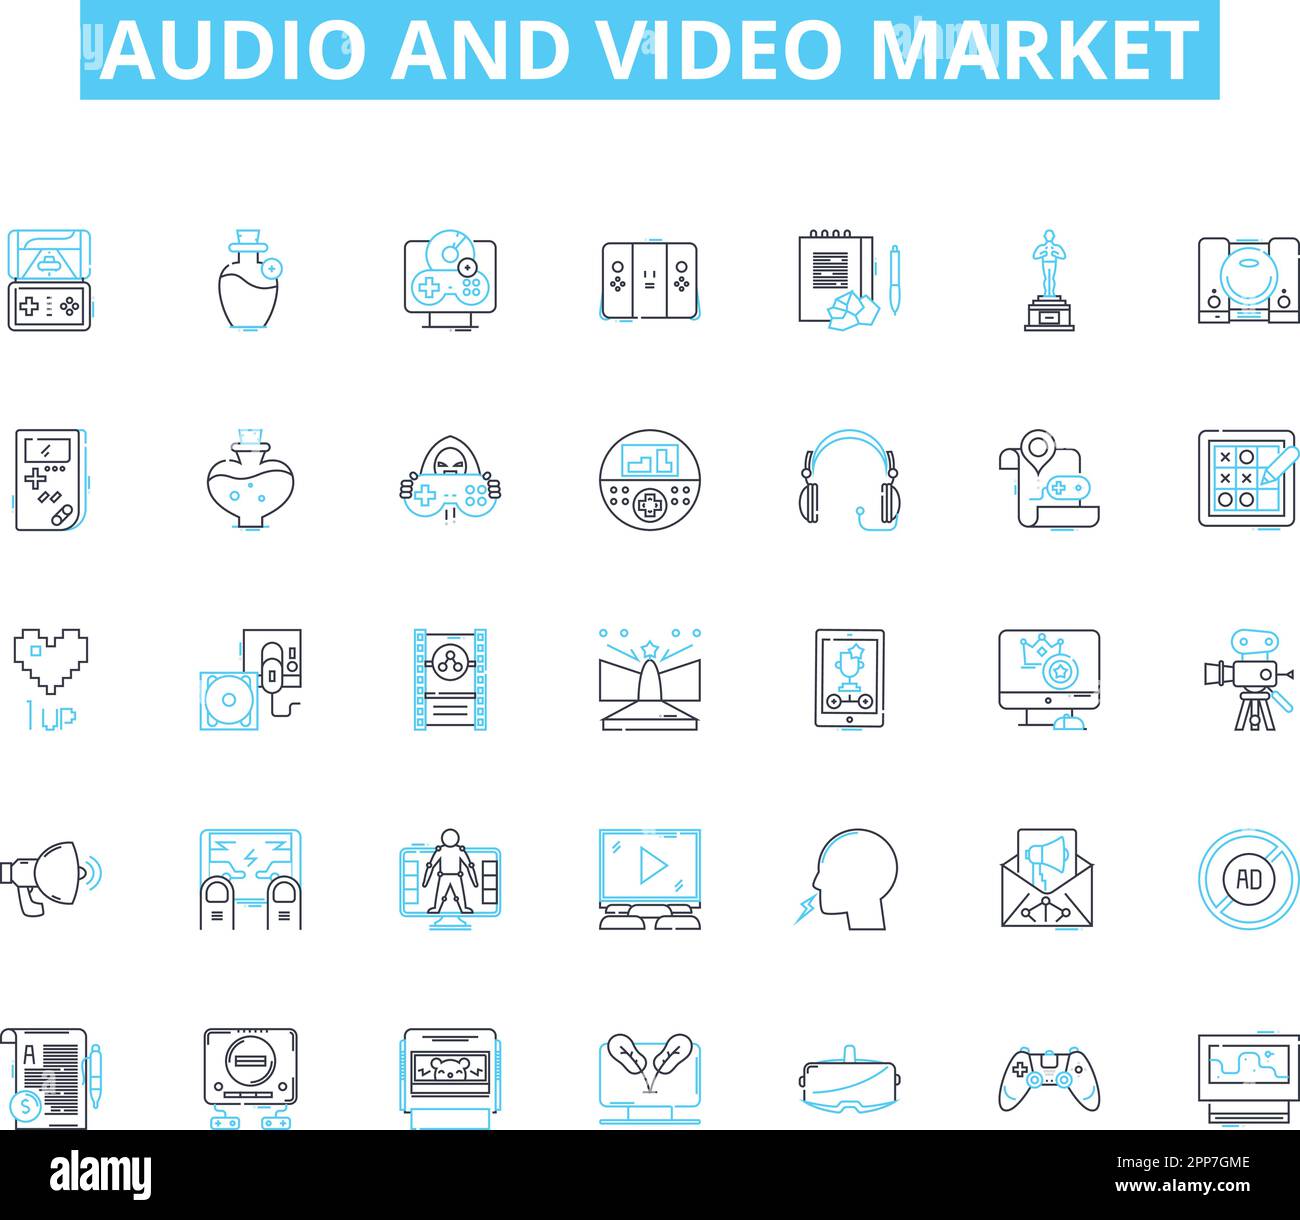 audio and video market linear icons set. Sound, Visuals, Speakers, Headphs, Amplifiers, Microphs, High-definition line vector and concept signs Stock Vector